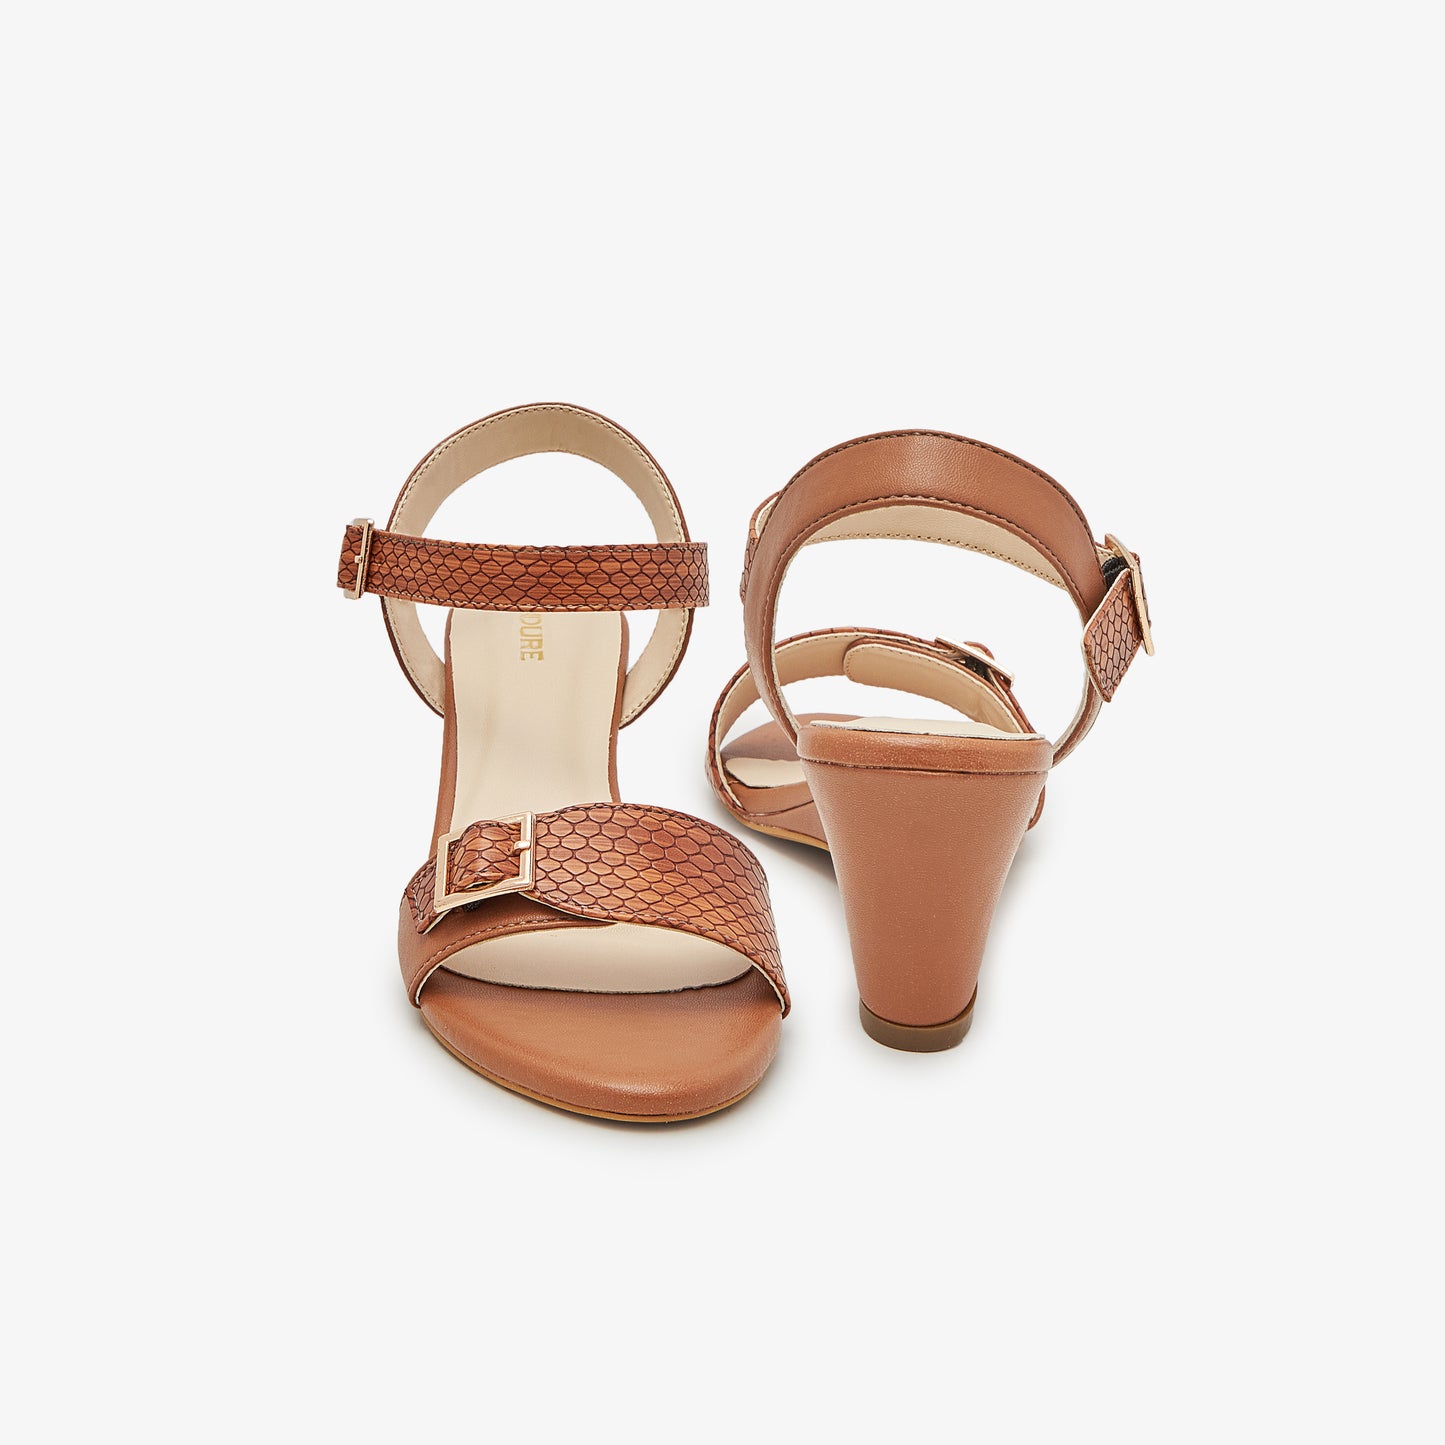 Buckled Wedges